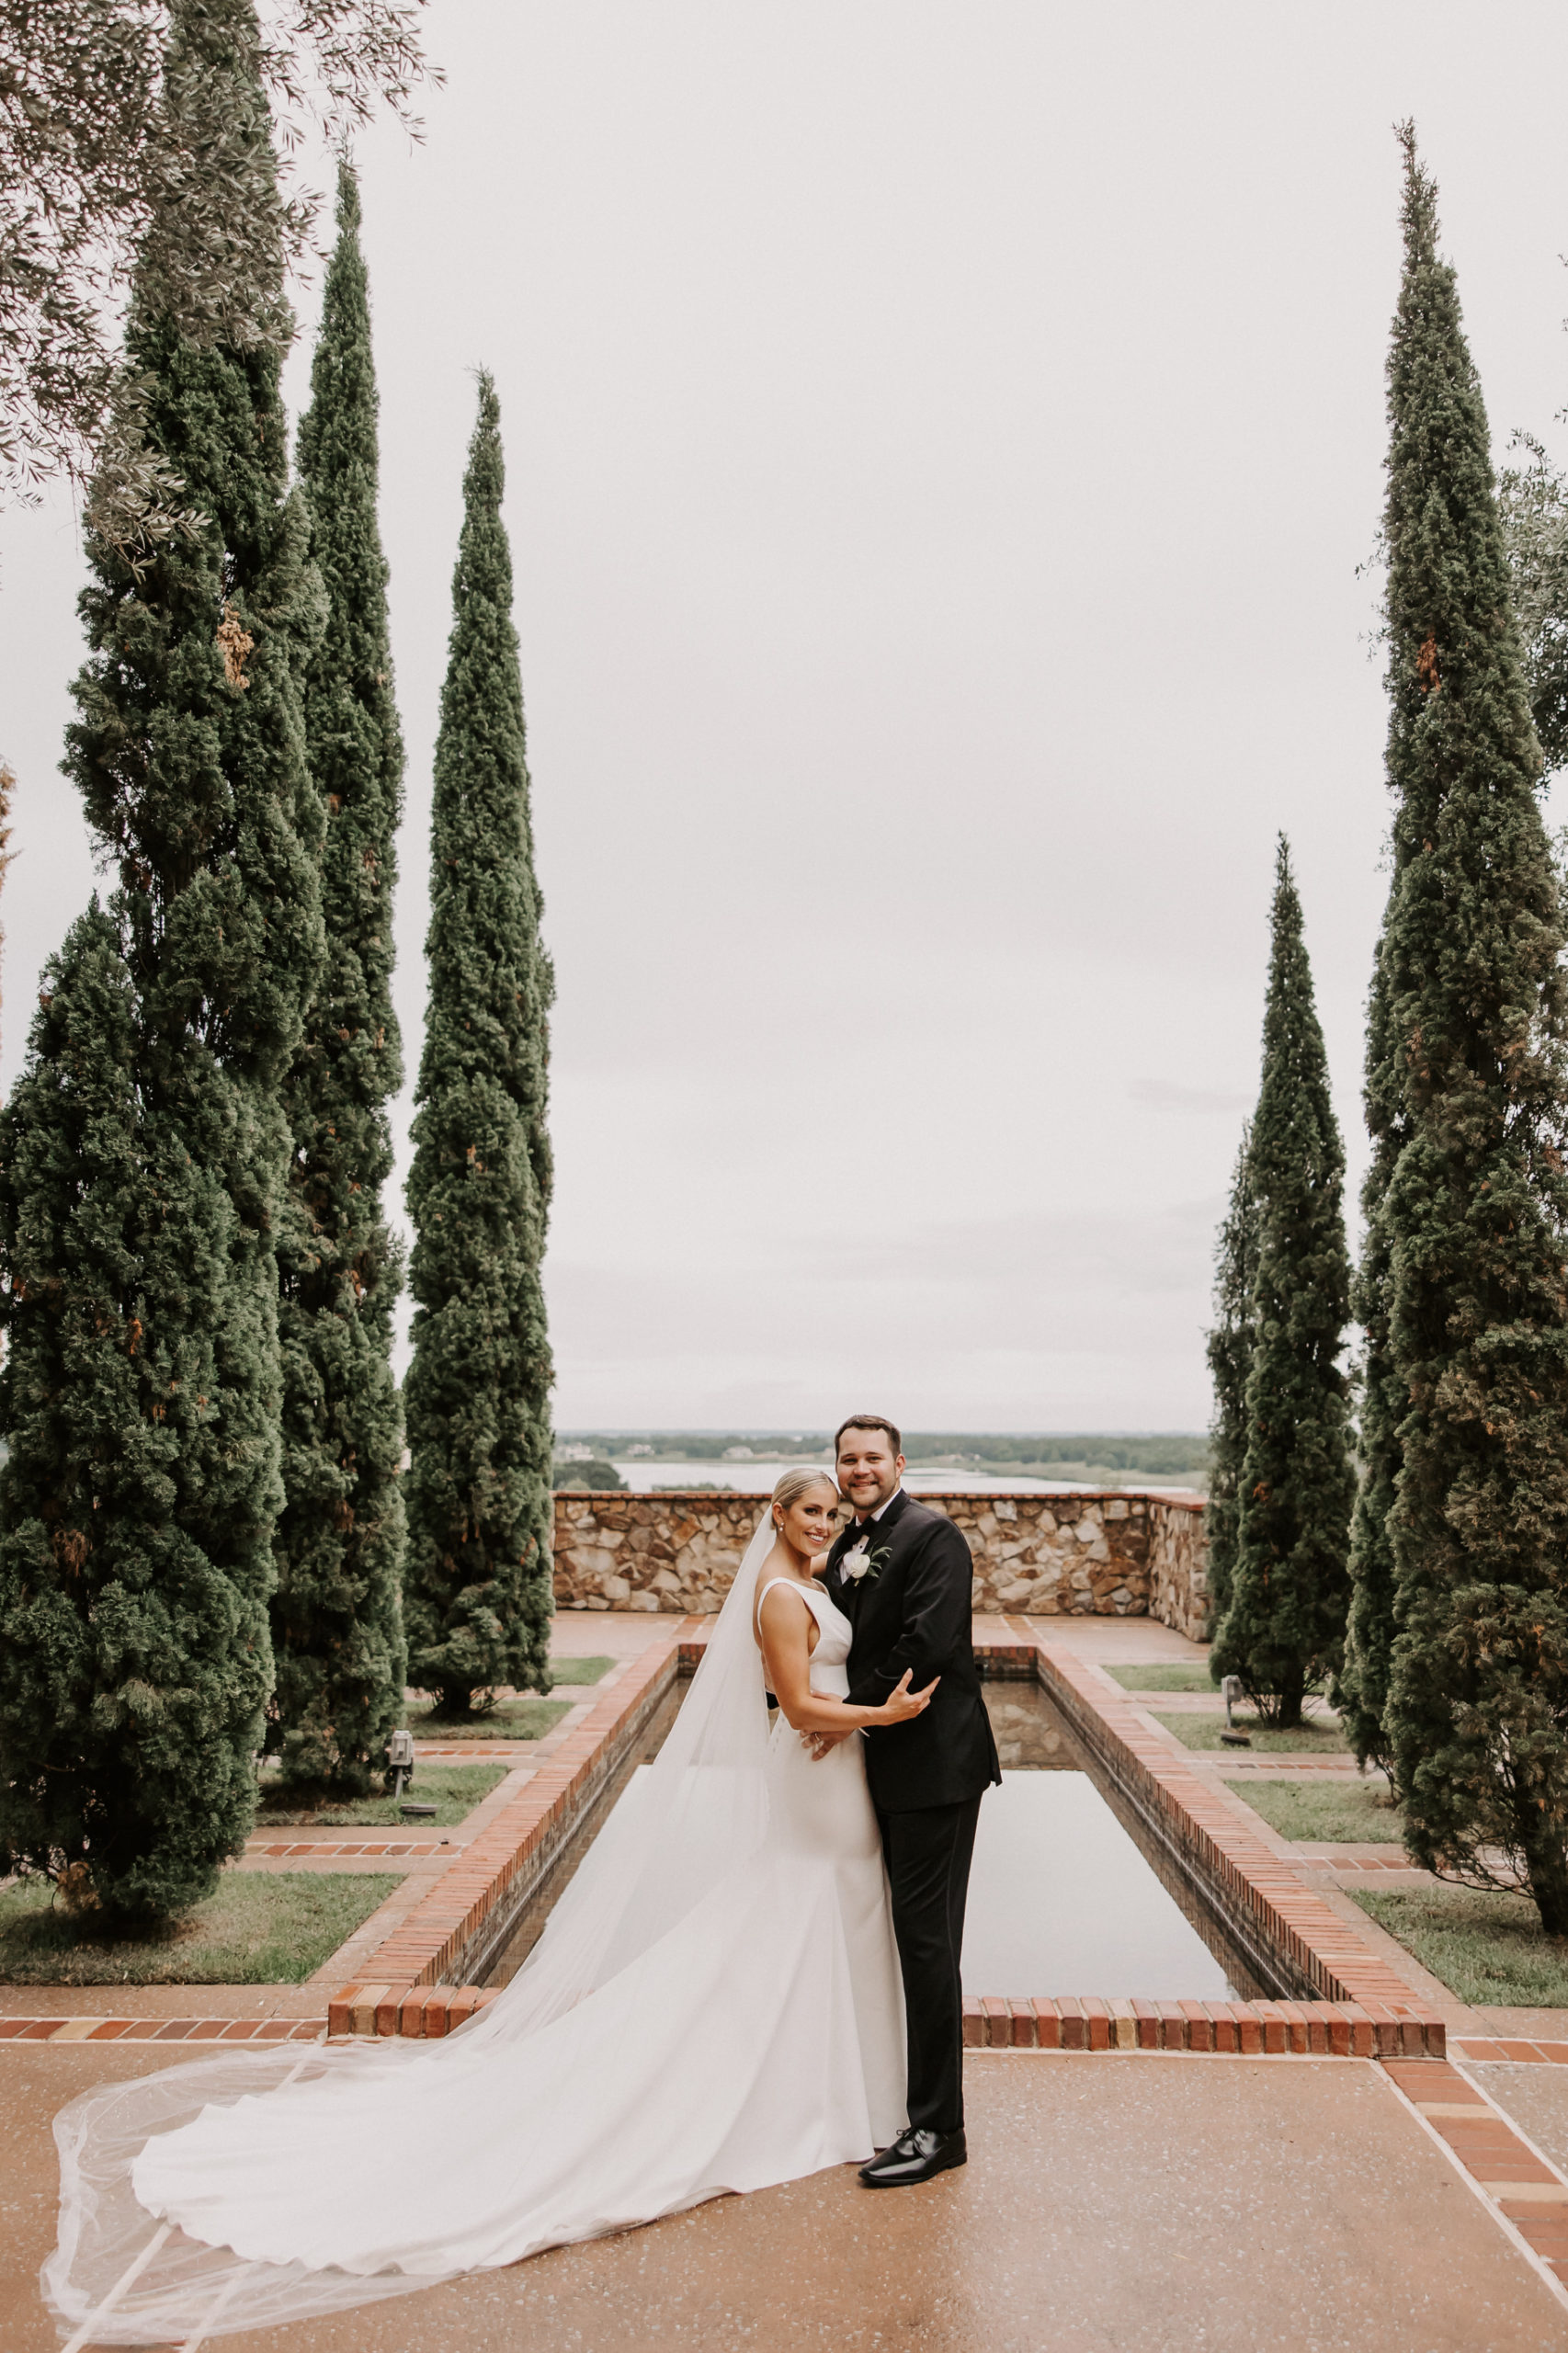 This venue offer multiple sites like the Grand Lawn, The Reflection Pond, and The Wine Cellar to take an amazing portraits before your elegant and timeless wedding. 